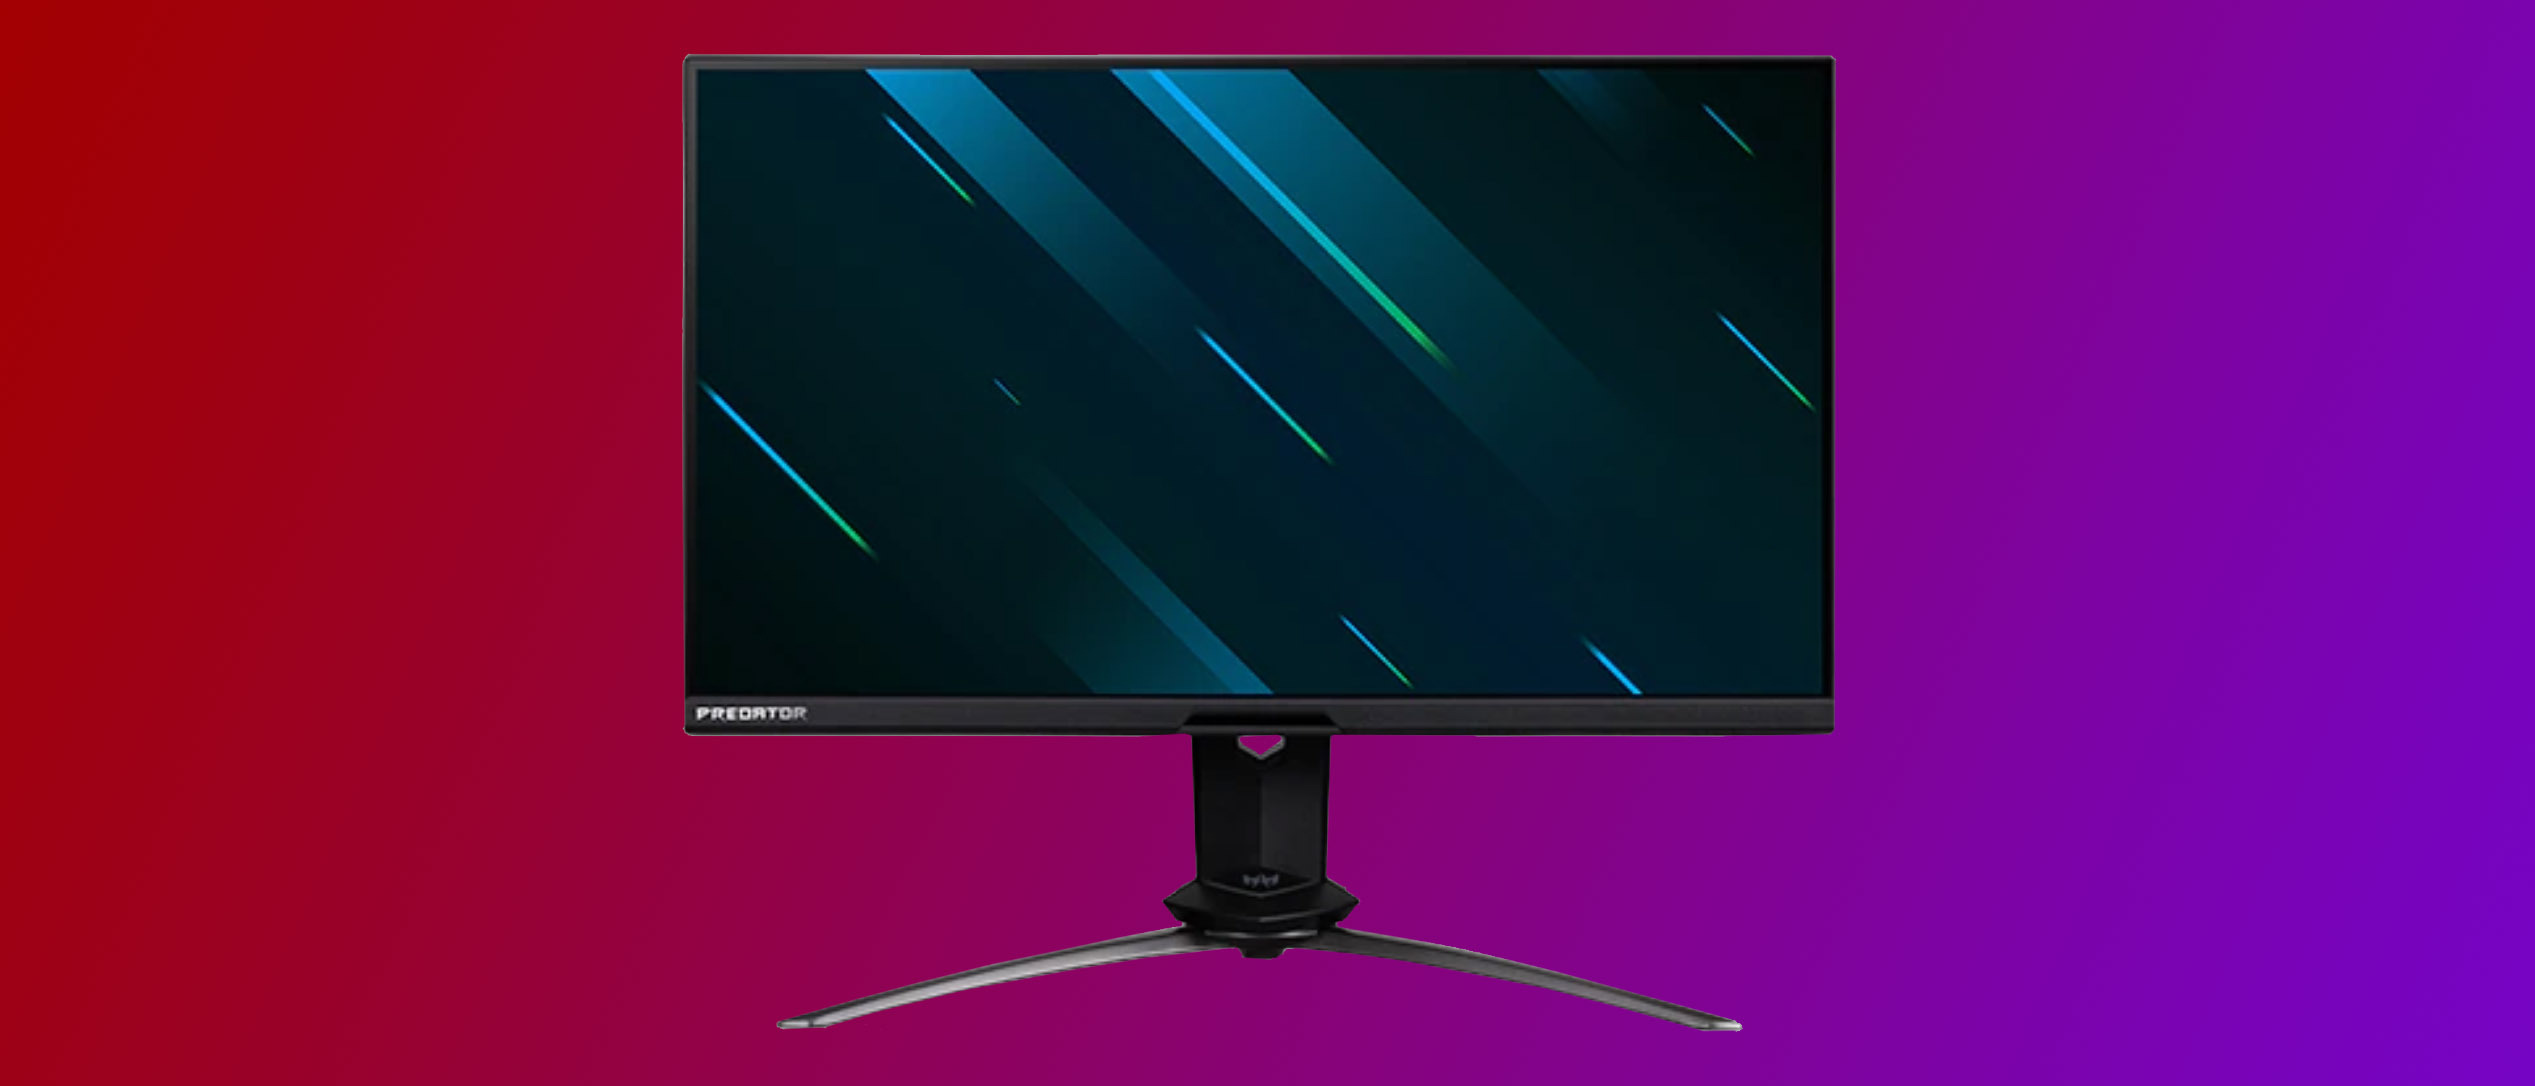 Acer Predator X Hz Monitor Review Raw Power and Speed for eSports Tom的硬件